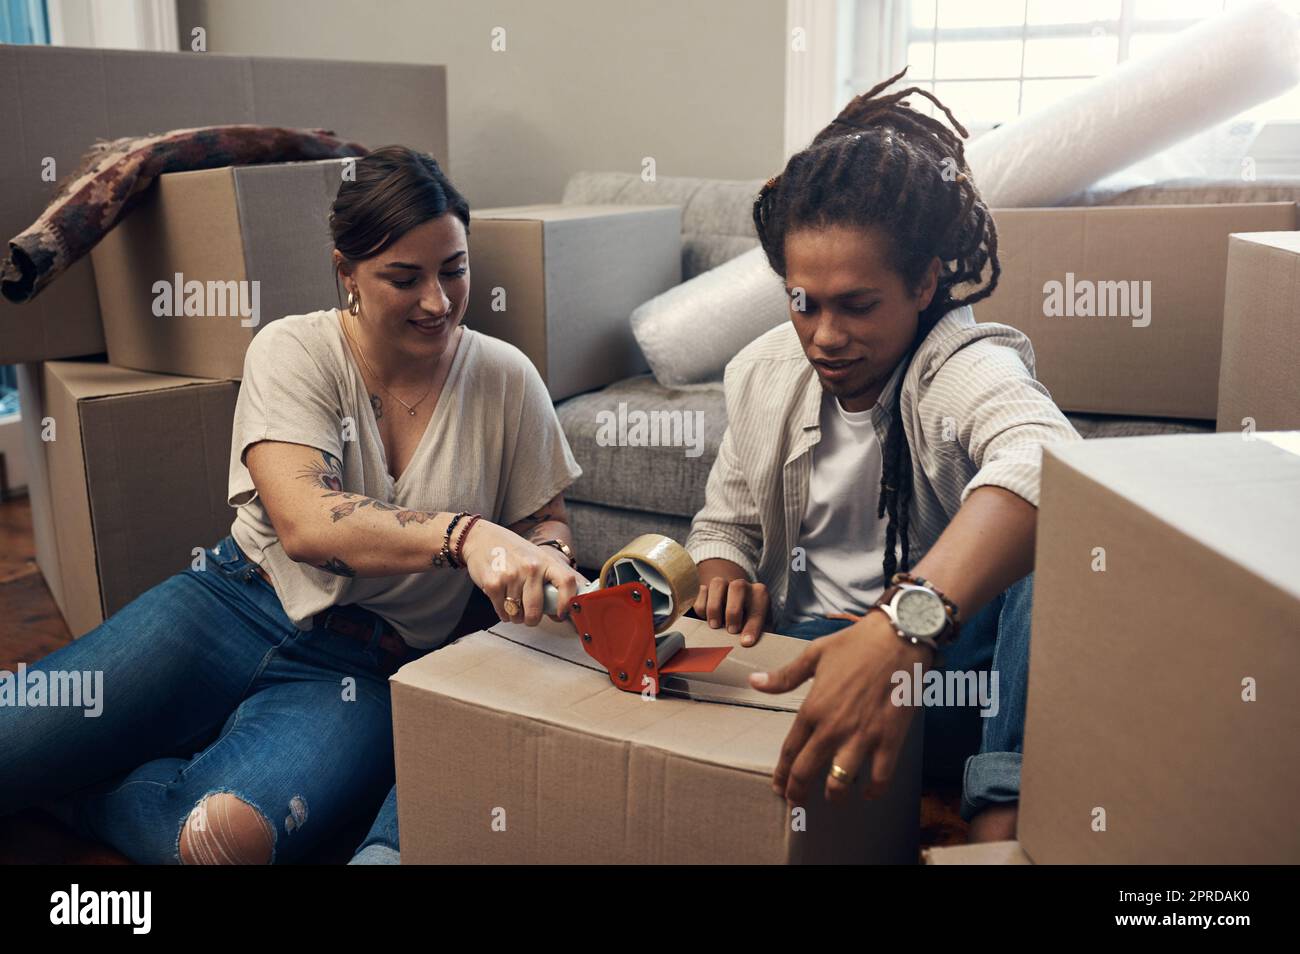 This one is ready to go. a young couple taping up boxes at home. Stock Photo